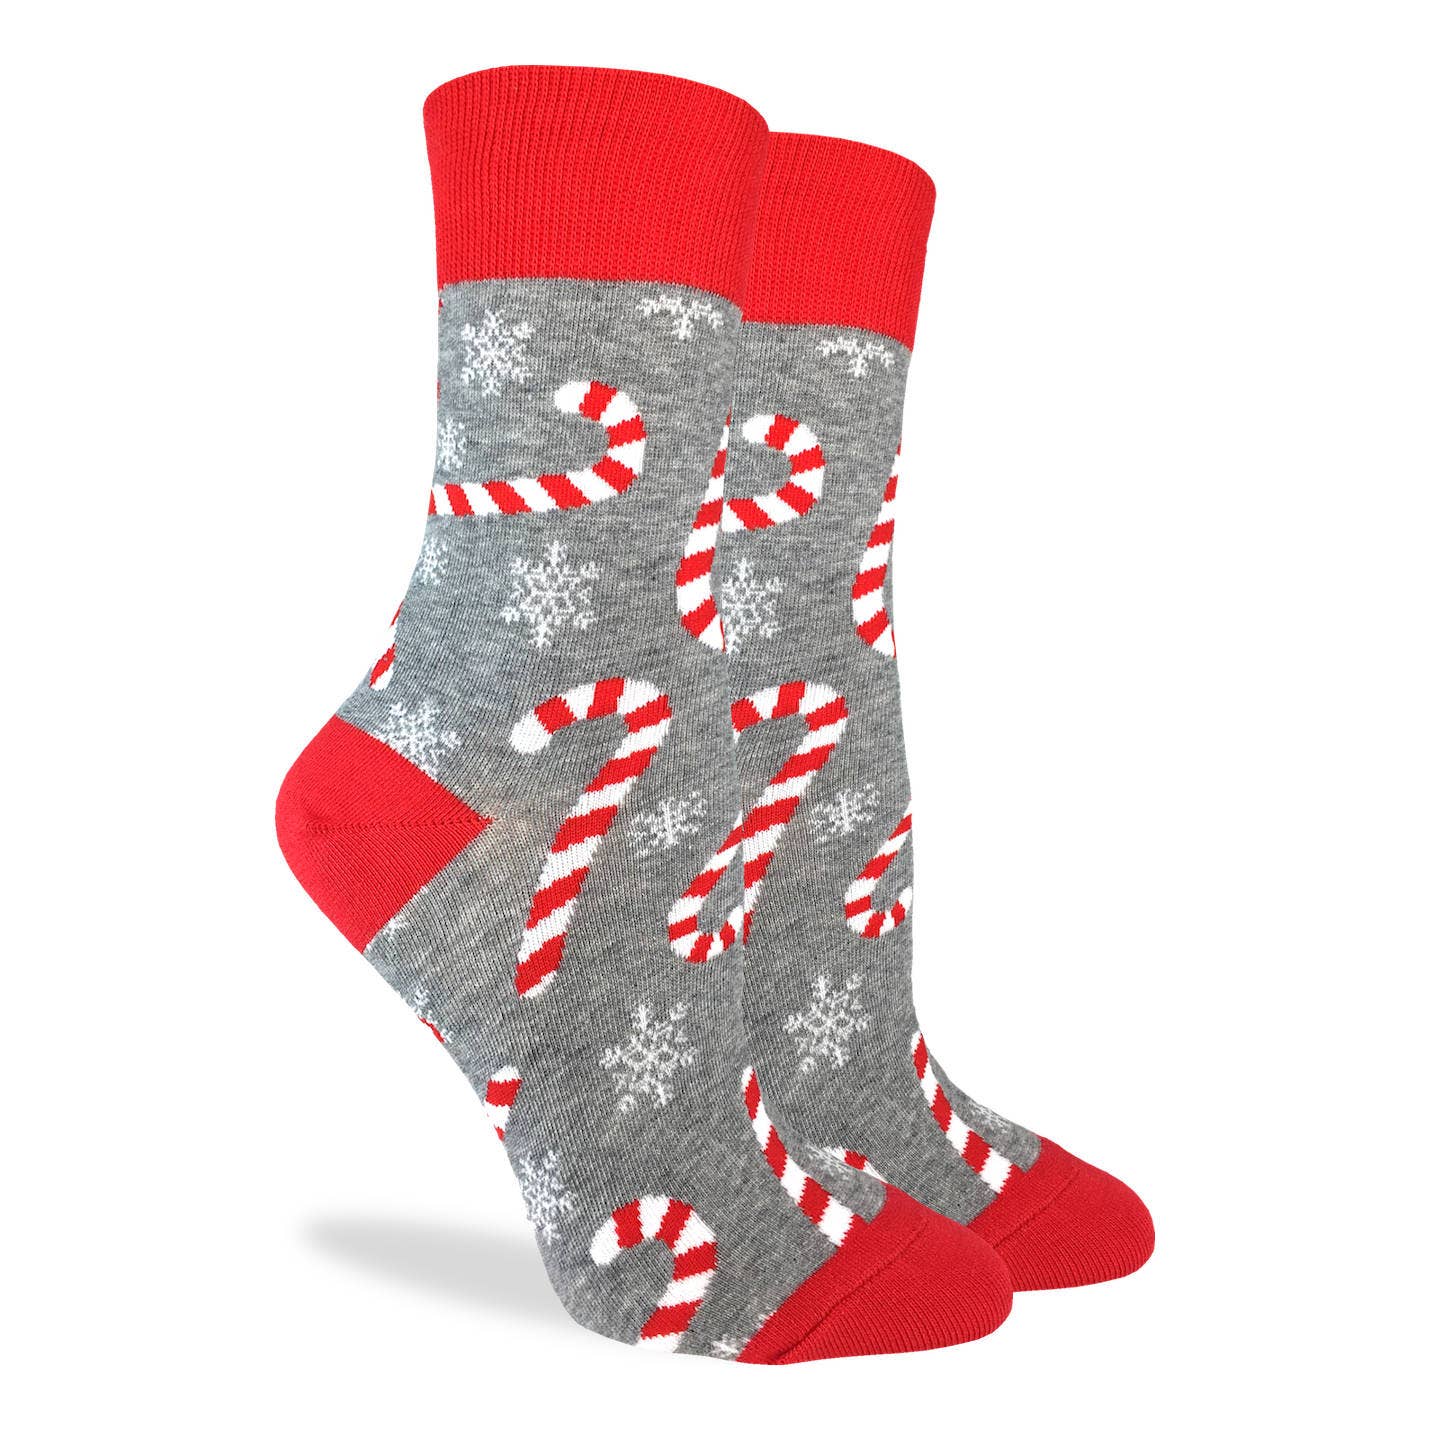 Good Luck Sock women's gray sock with red cuff, toe and heel and candy canes and snowflakes all over on display feet